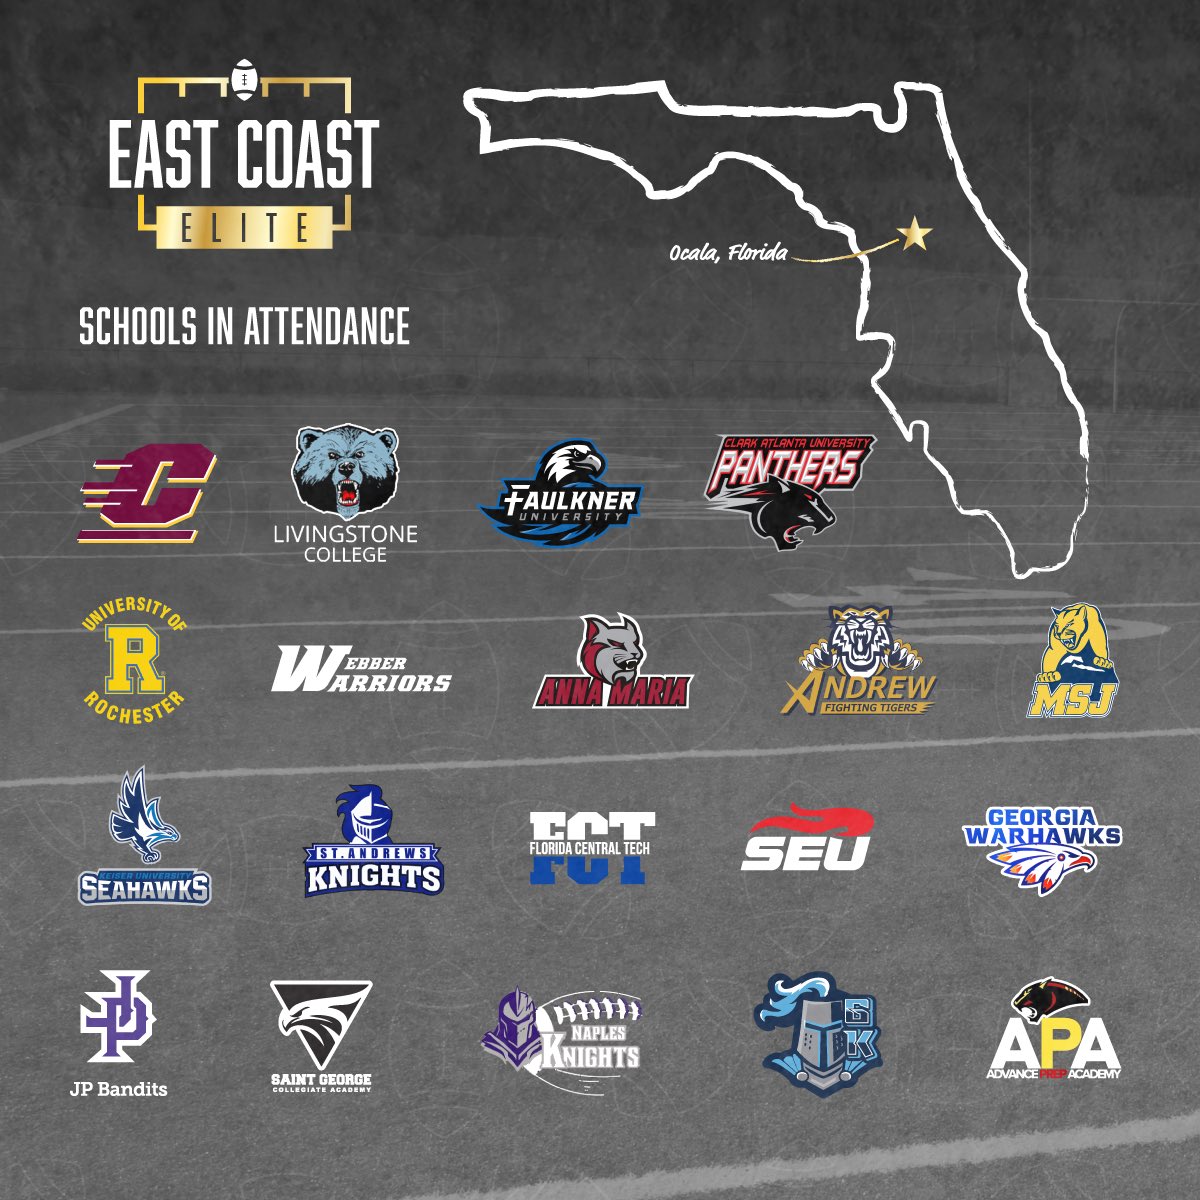 🚨May 11th🚨 Ocala Fl #eastcoastelite All prospects will have their information sent to the institutions along with their performance at the camp. Not too late to pre-register. Link is open ⬇️ gastrainingllc.com/east-coast-eli…